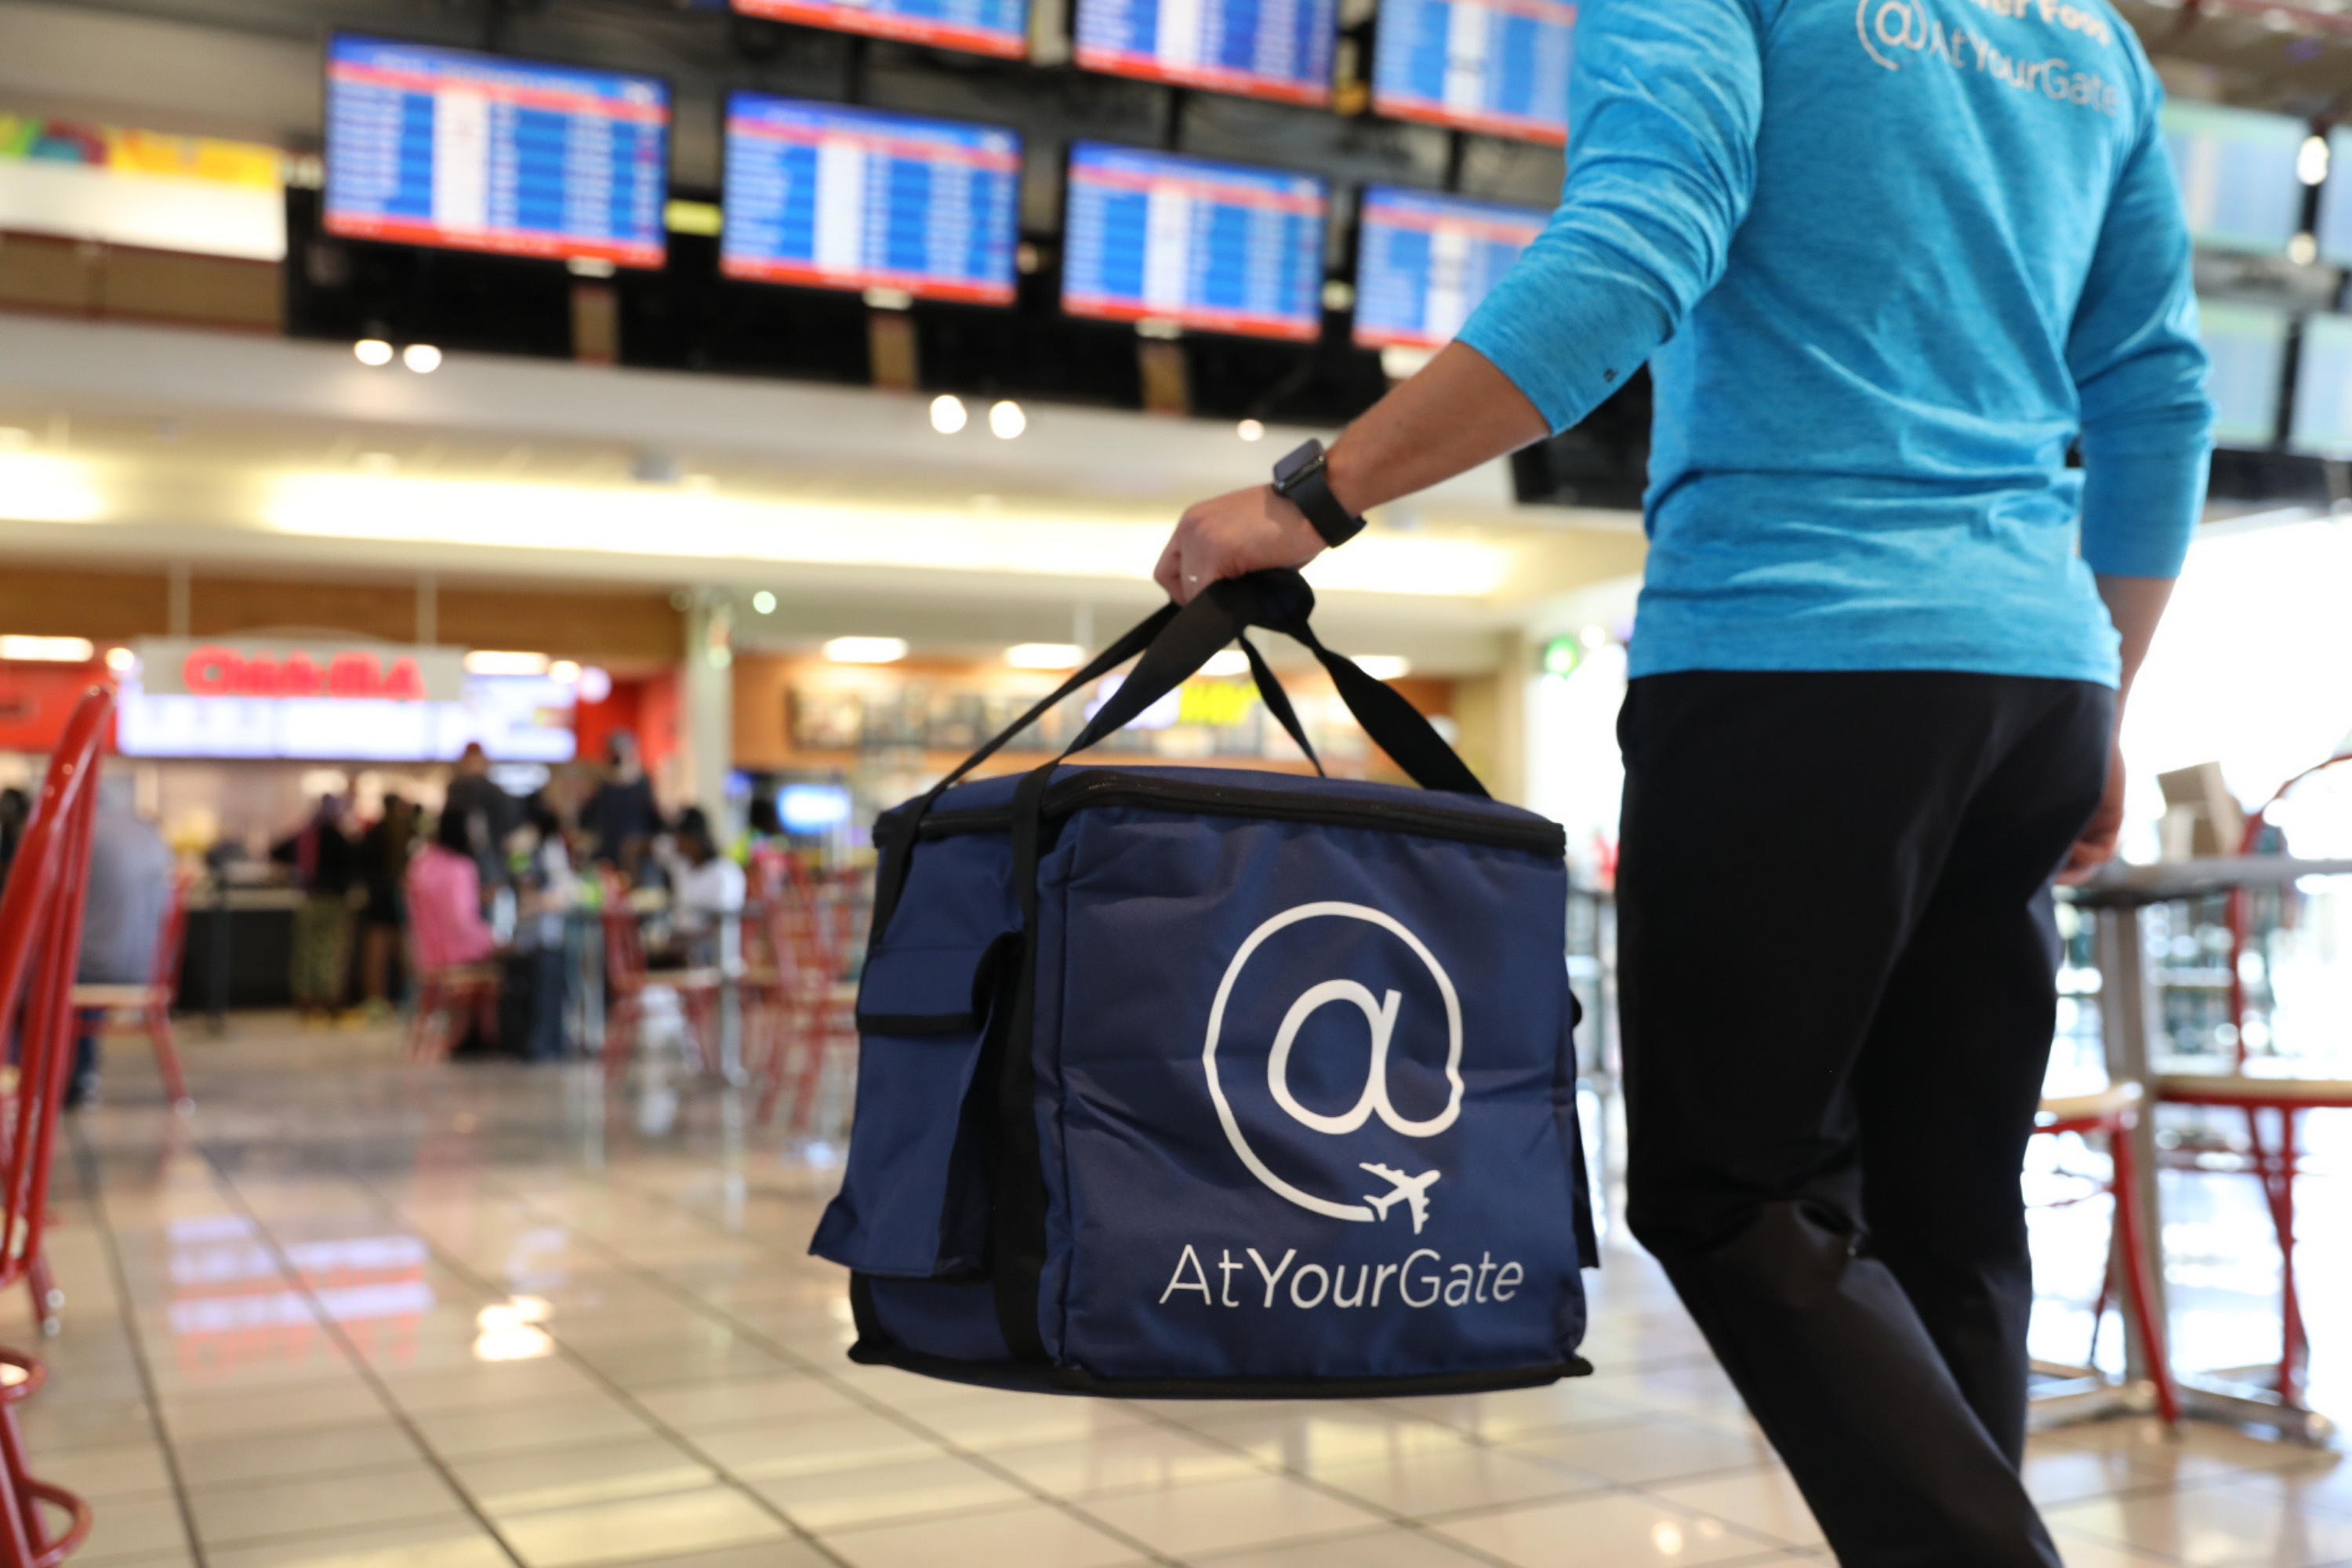 Servy and AtYourGate roll out contactless order and pay and delivery programs at international airports across the US